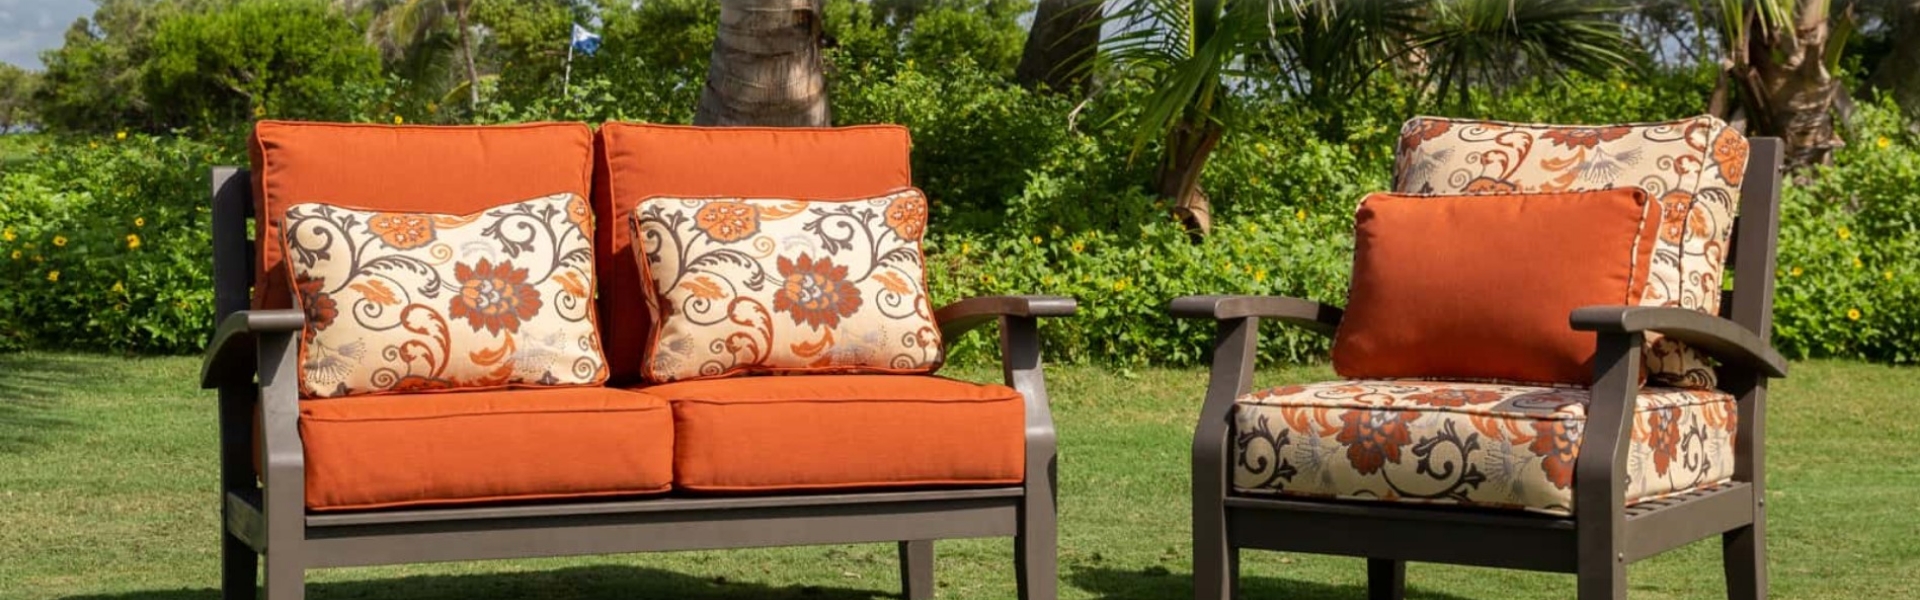 Outdoor Patio Cushions with Summer Style